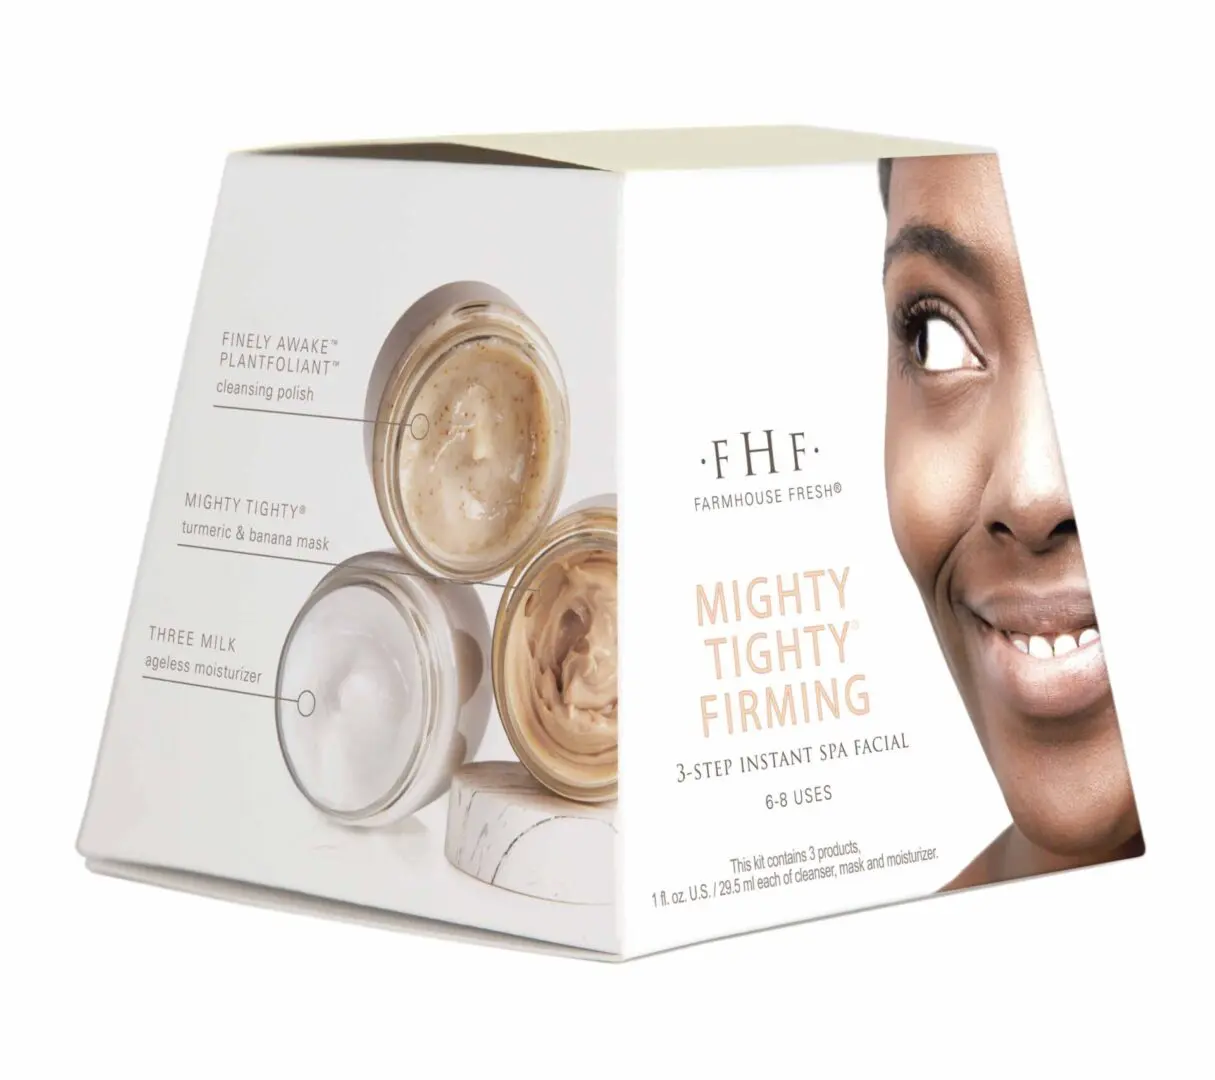 A box of the face shop 's mighty, tightly firming cream.